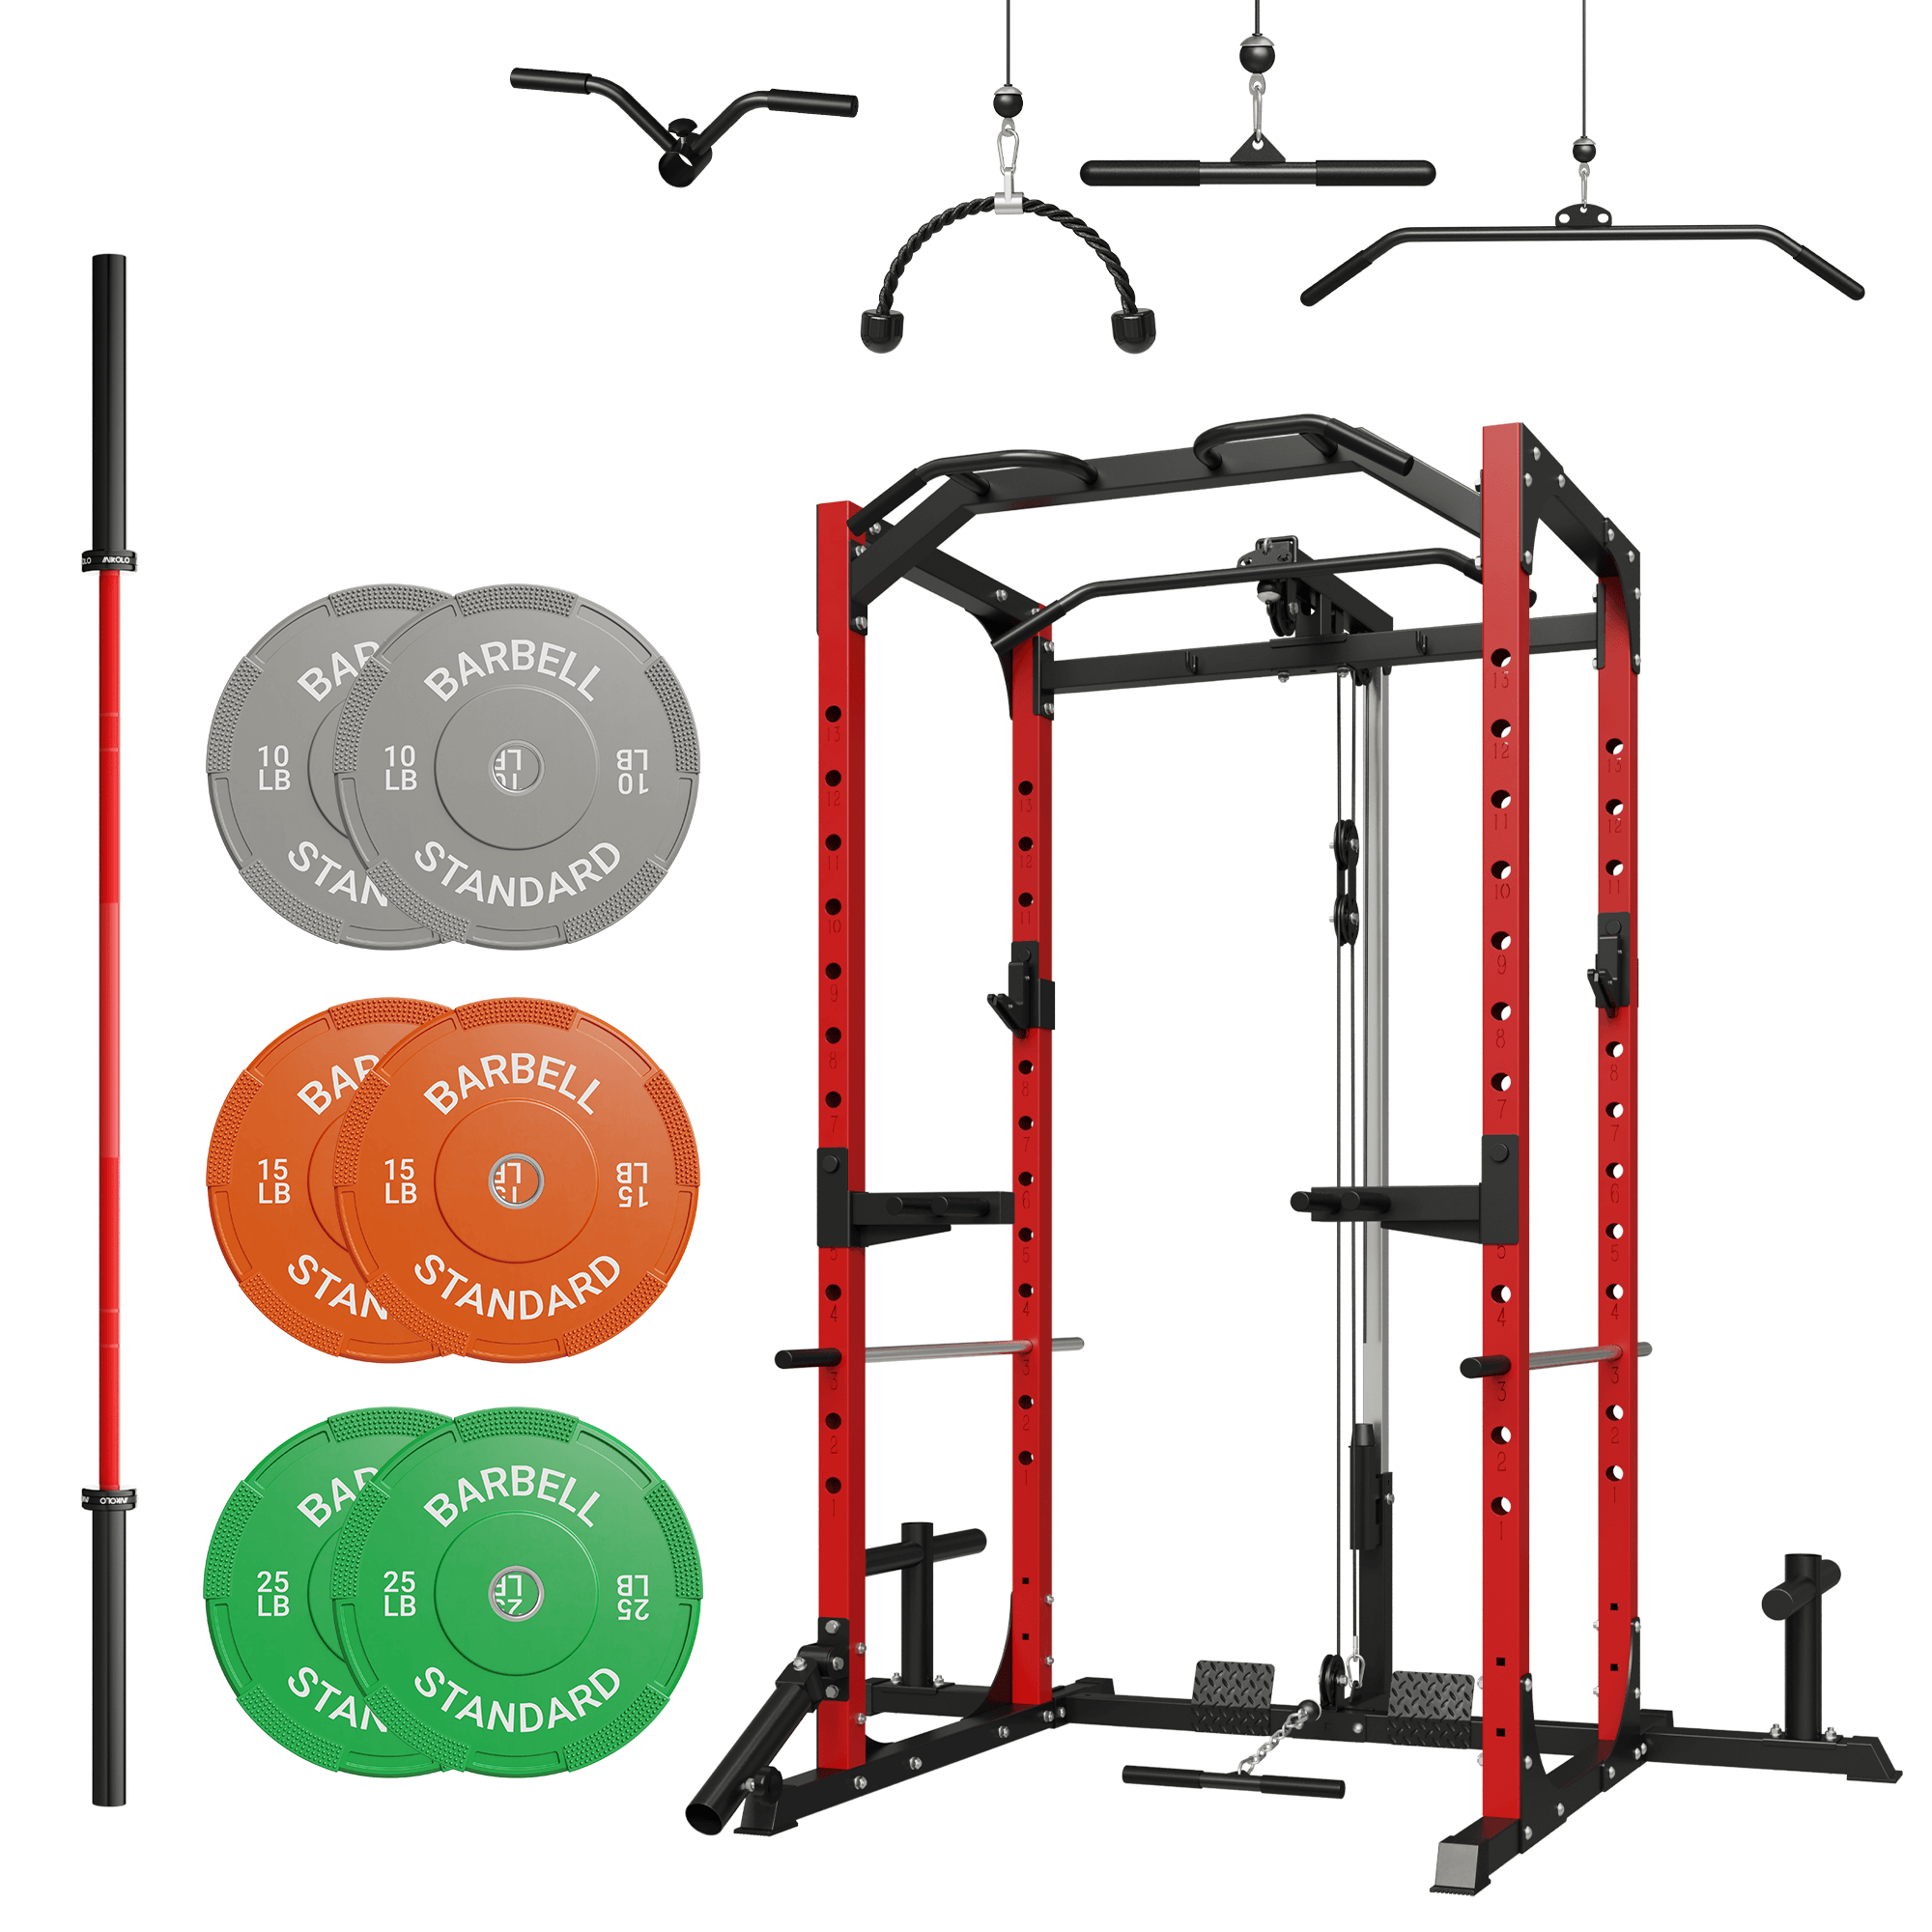 MIKOLO F4 Rack with Barbell and Weights Set